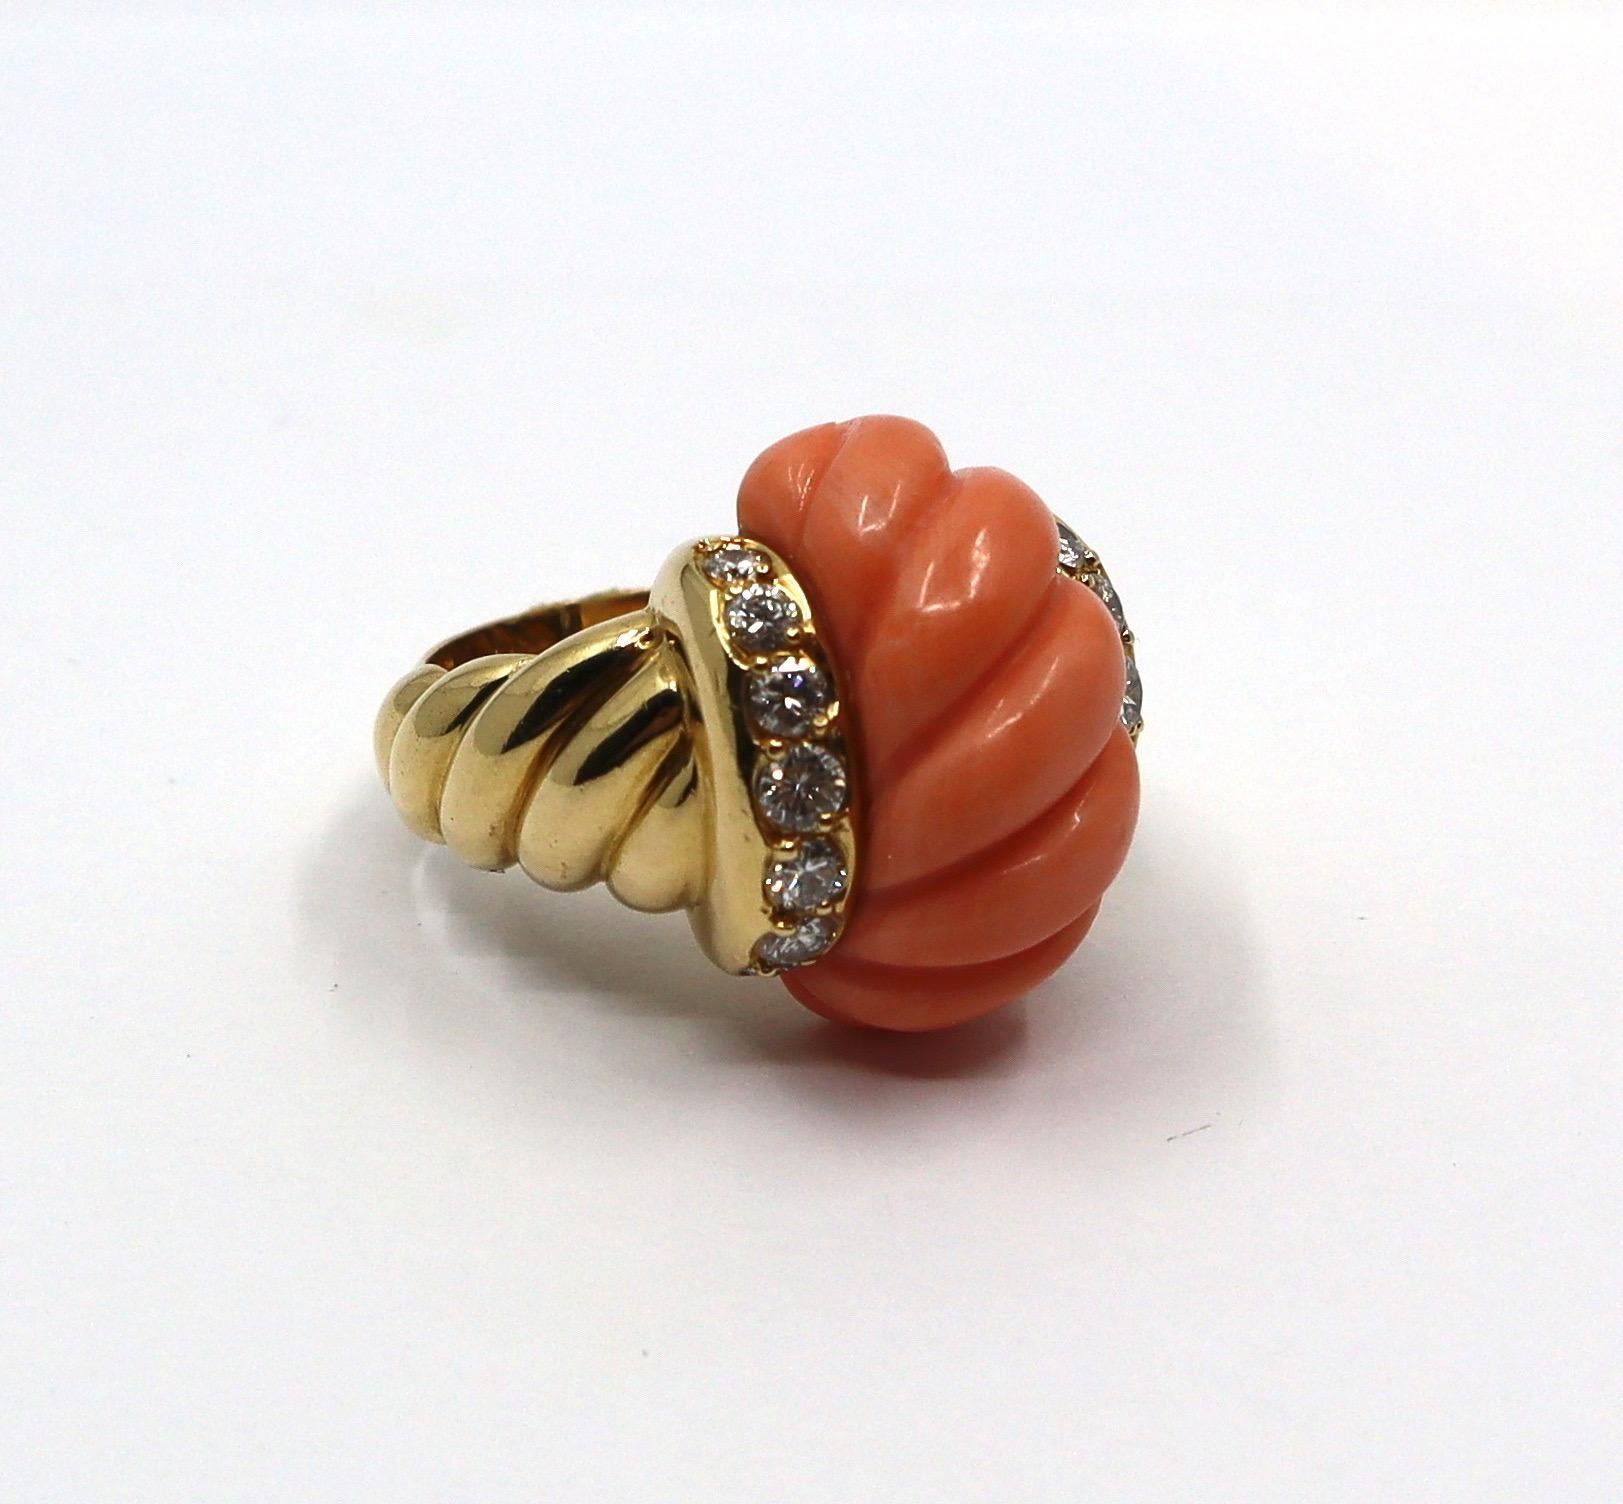 Beautiful Van Cleef & Arpels ring in gardooned yellow gold, set with an important carved pink coral surrounded by 14 round cut diamonds. 
Signed VCA and numbered. 
Made in the 60'. 
A rare ring, a typical design from the 60s - 70s, this vintage ring